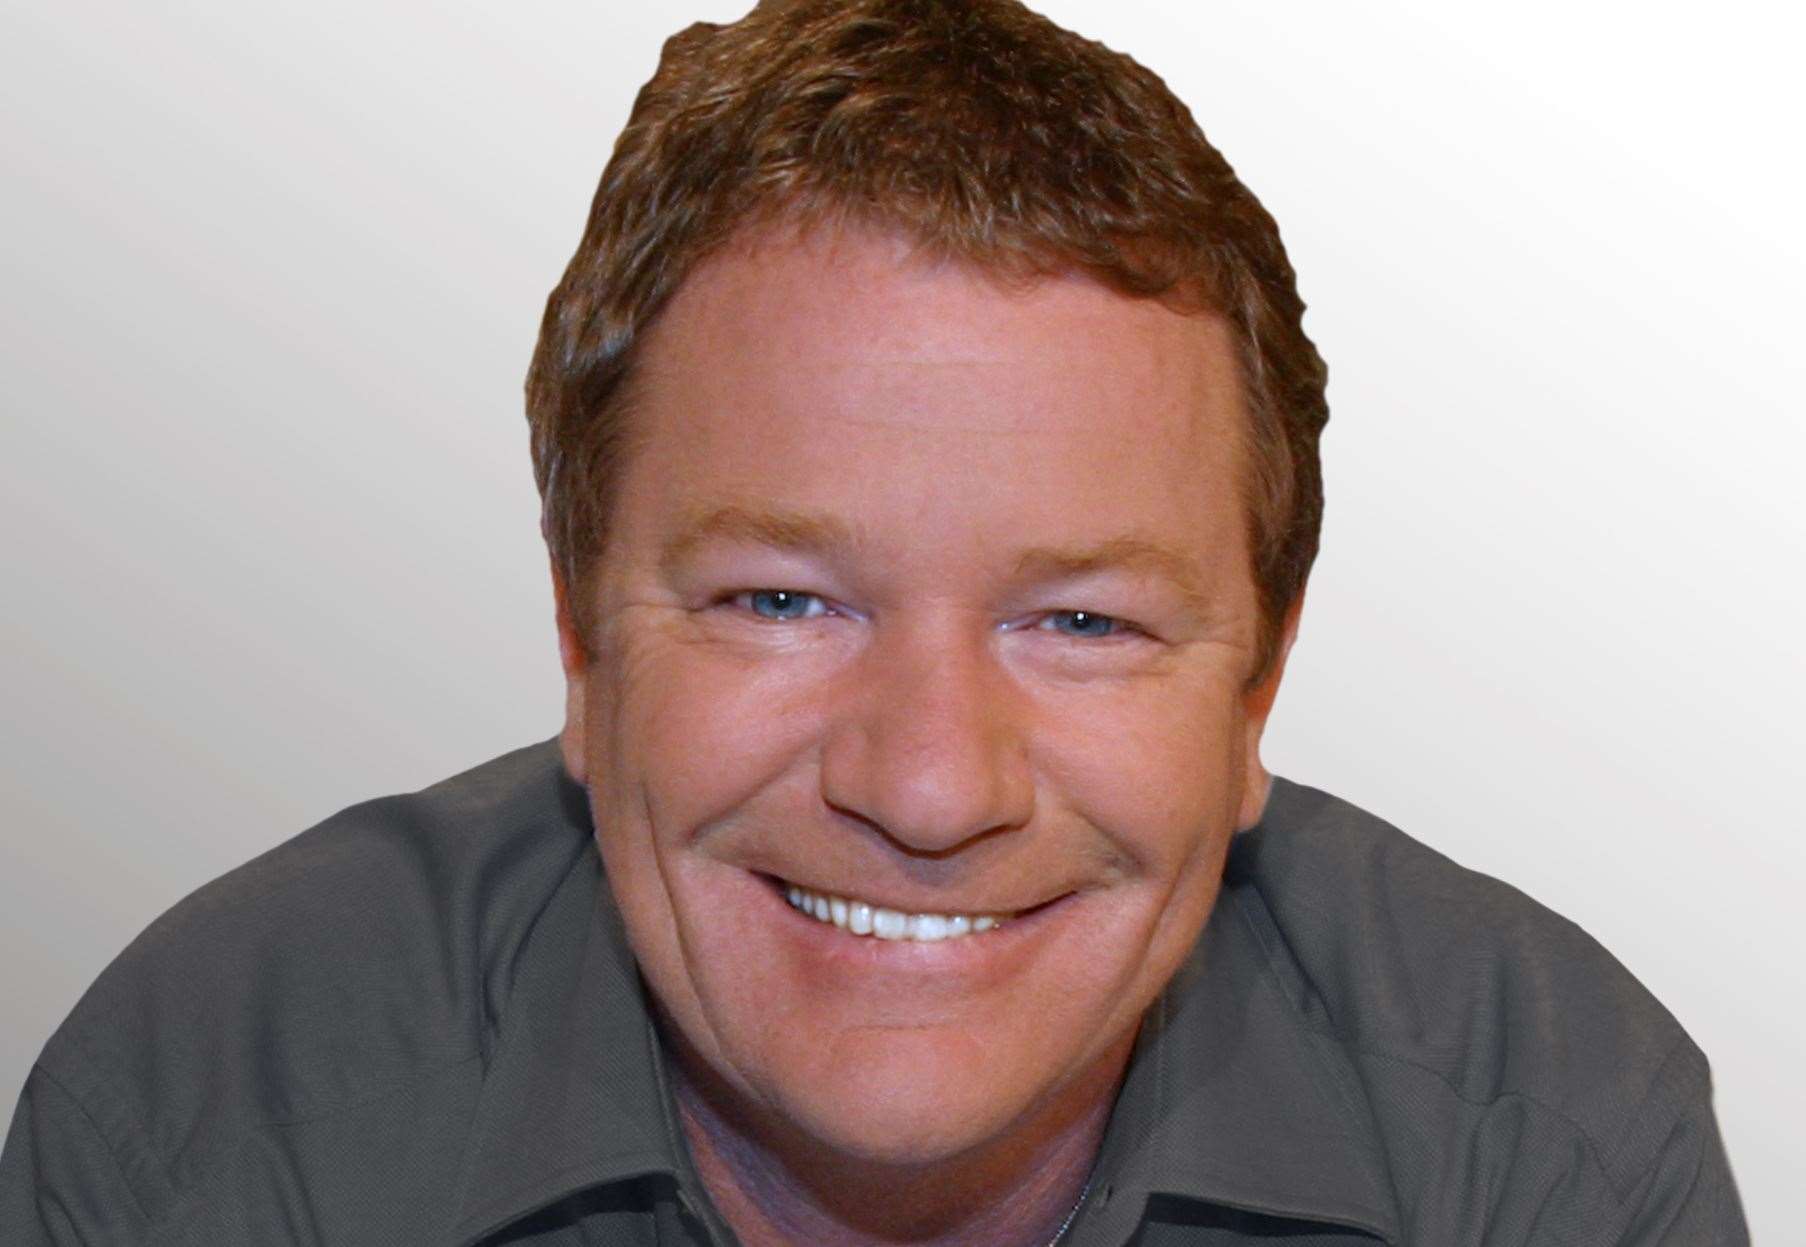 Jim Davidson was a huge hit on TV screens with the likes of Big Break and The Generation Game on the BBC